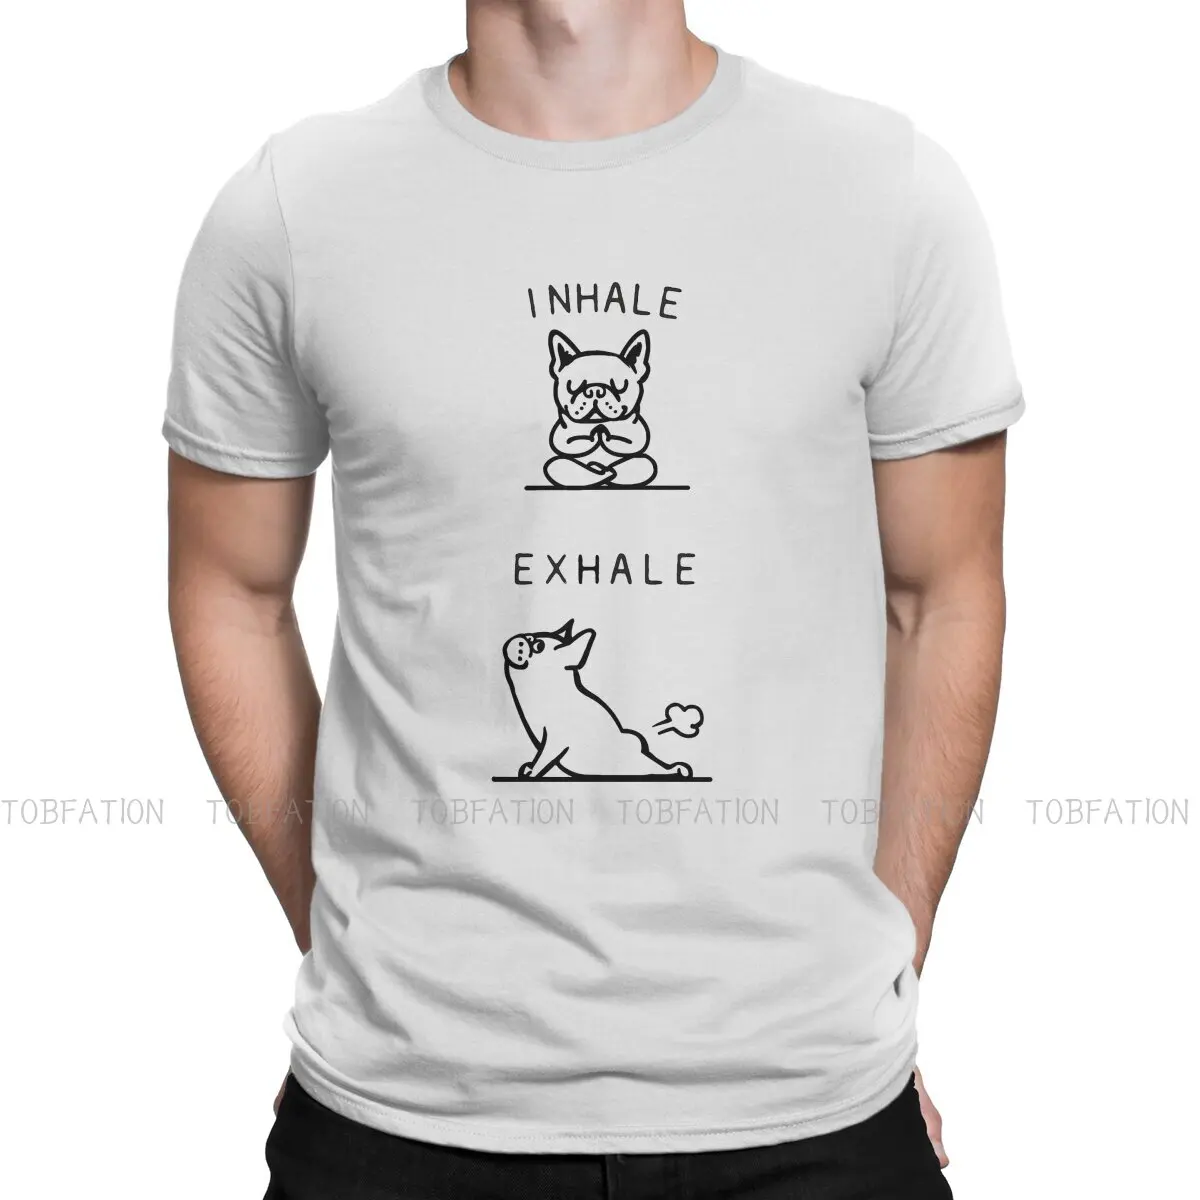 

French Bulldog Strong Mini Dog Original TShirts Inhale Exhale Frenchie Print Homme T Shirt Funny Clothing Size S-6XL